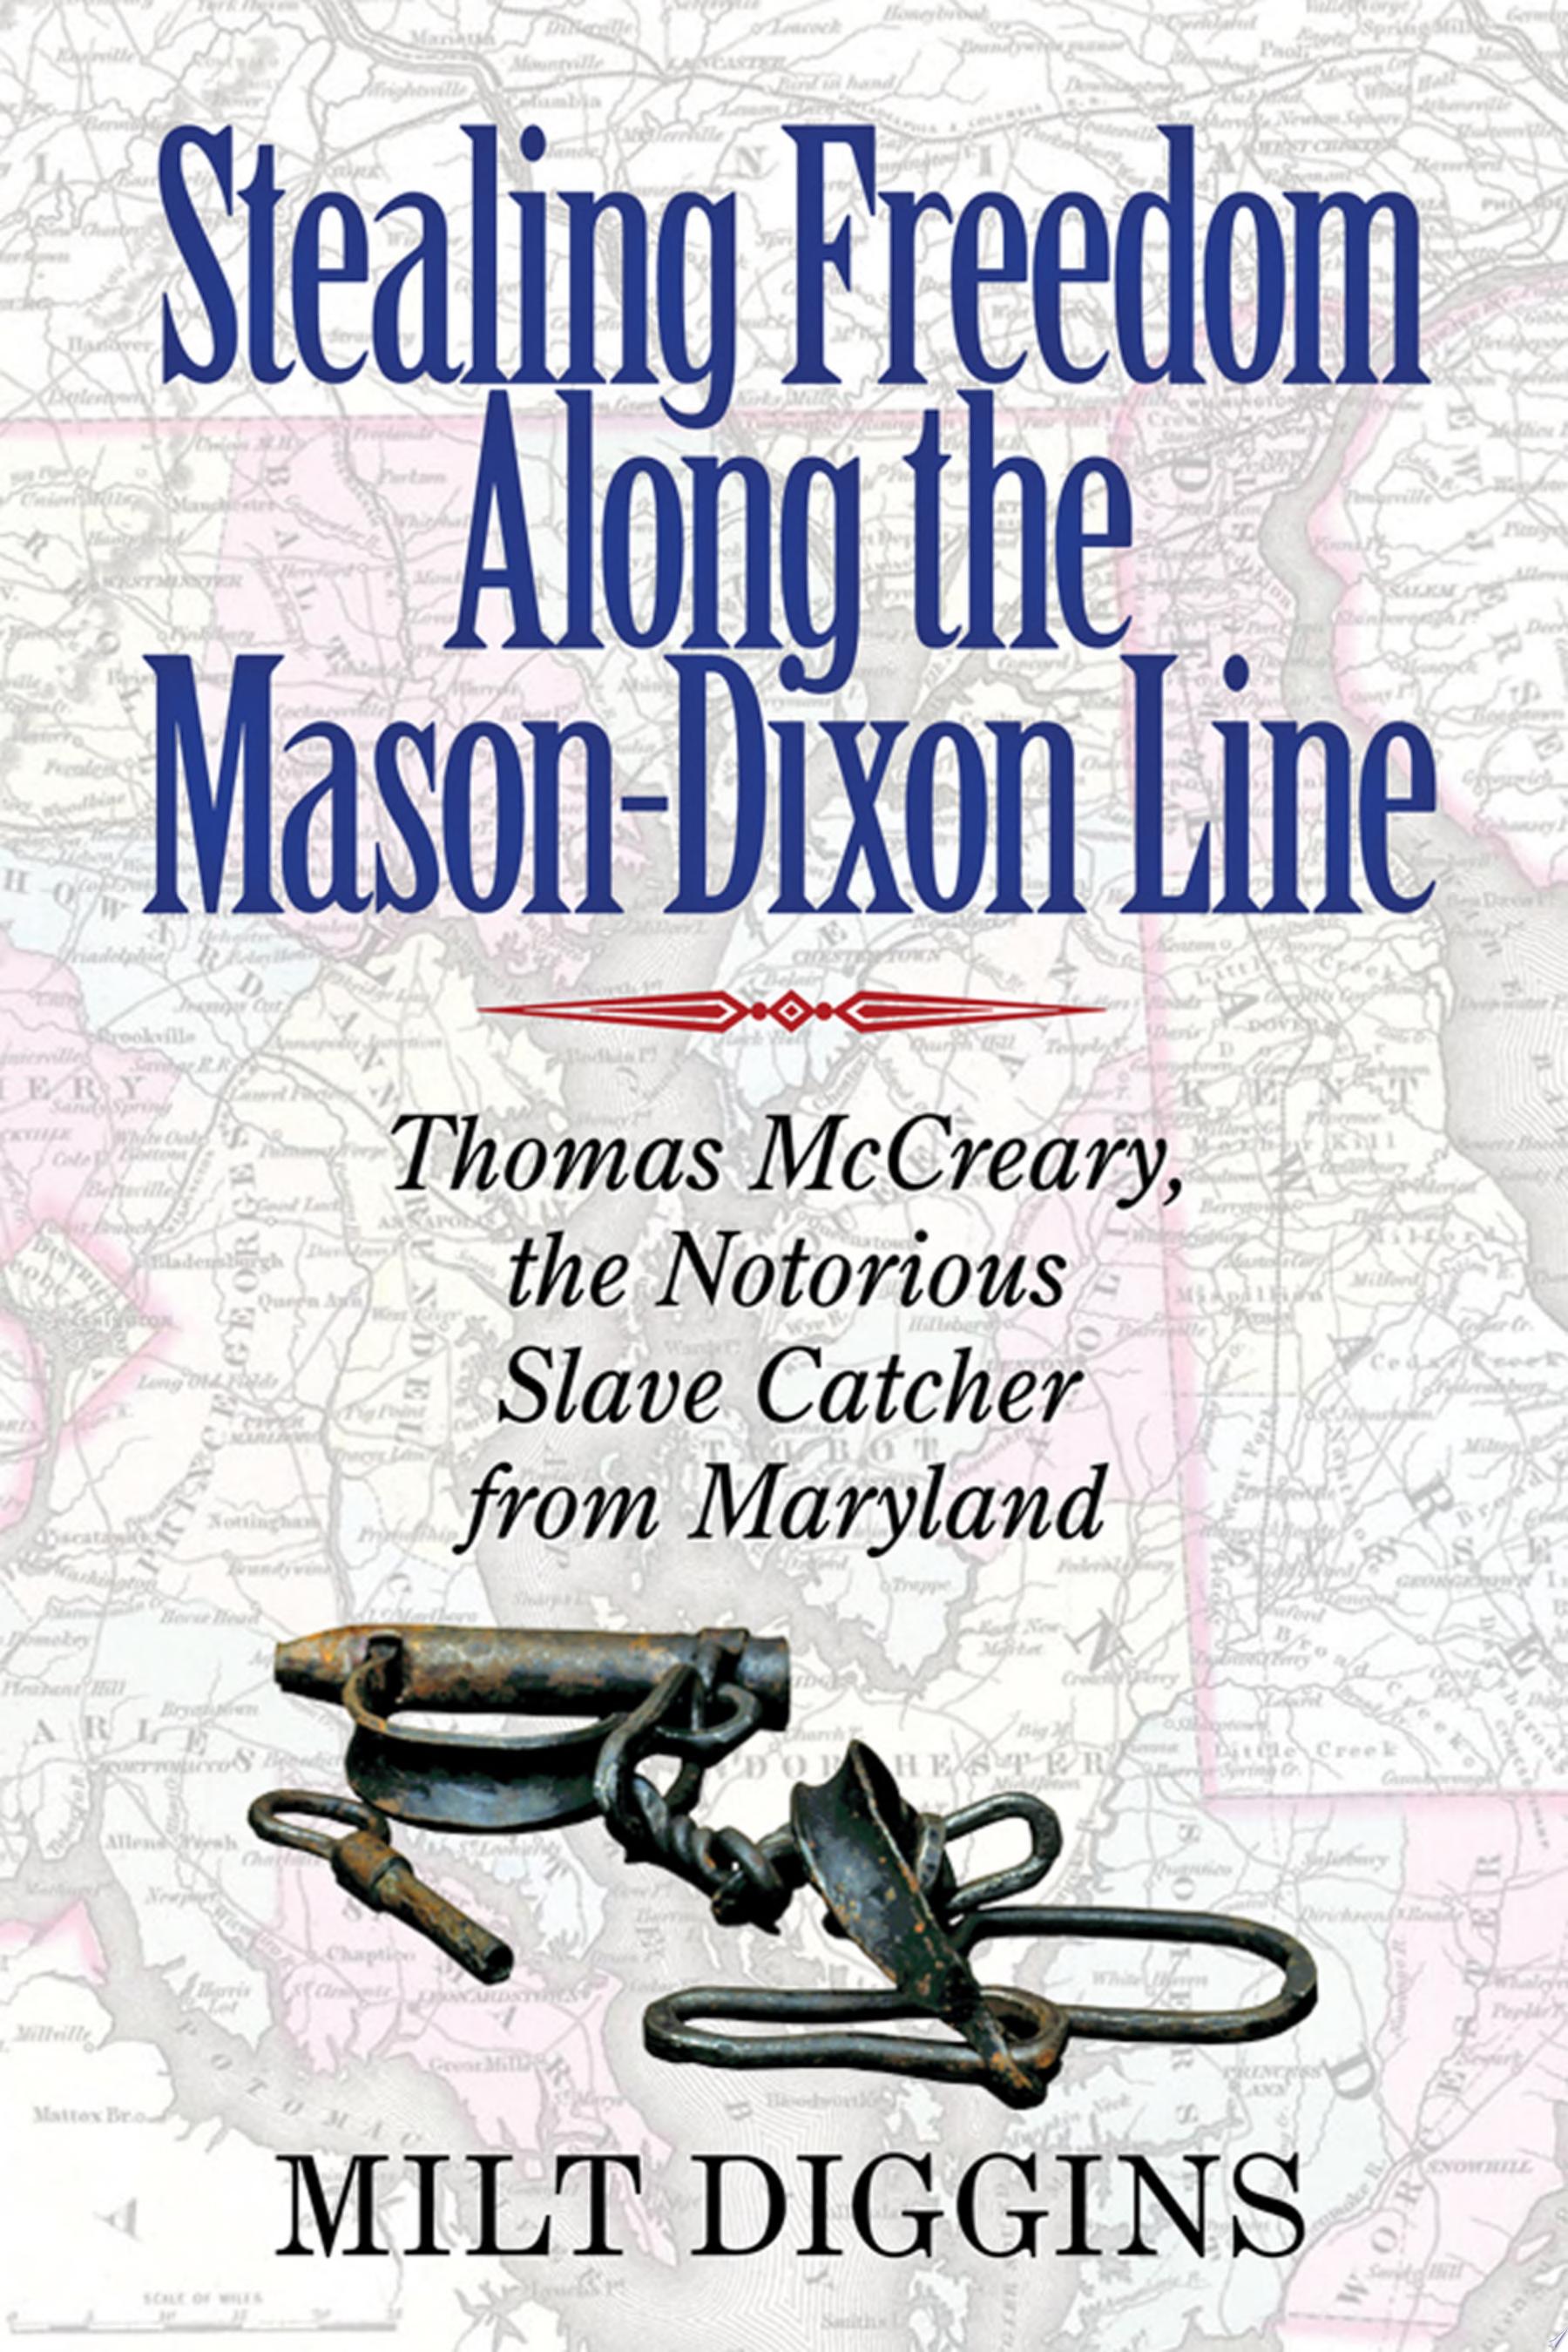 Image for "Stealing Freedom Along the Mason-Dixon Line"